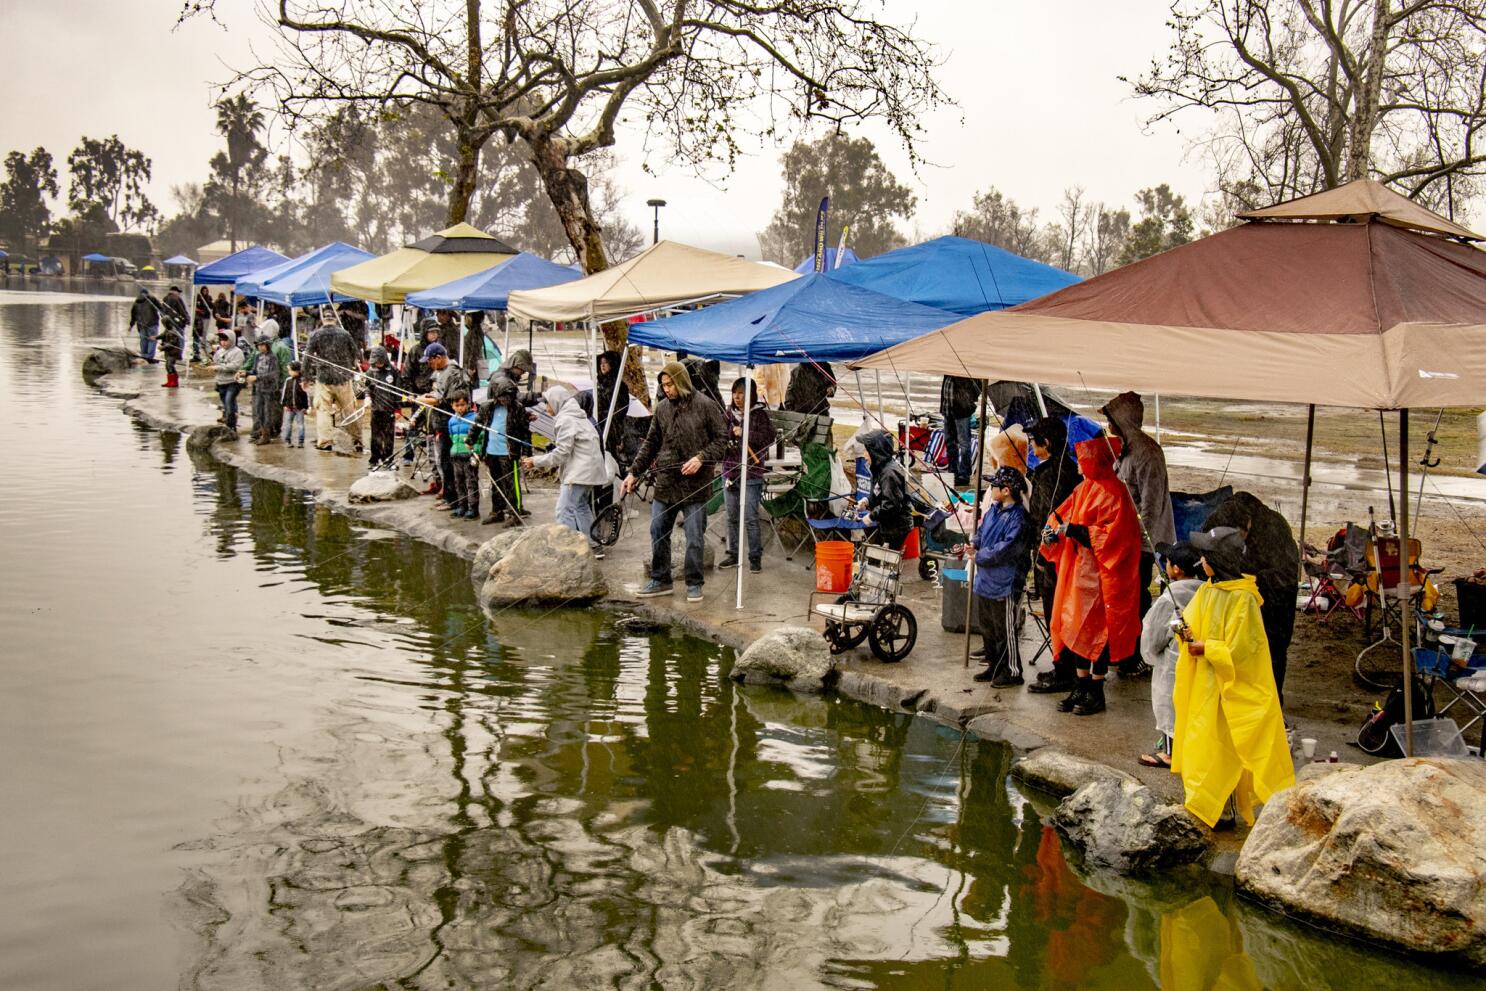 FREE Kids Fishing Derby - Mile Square Park in Fountain Valley